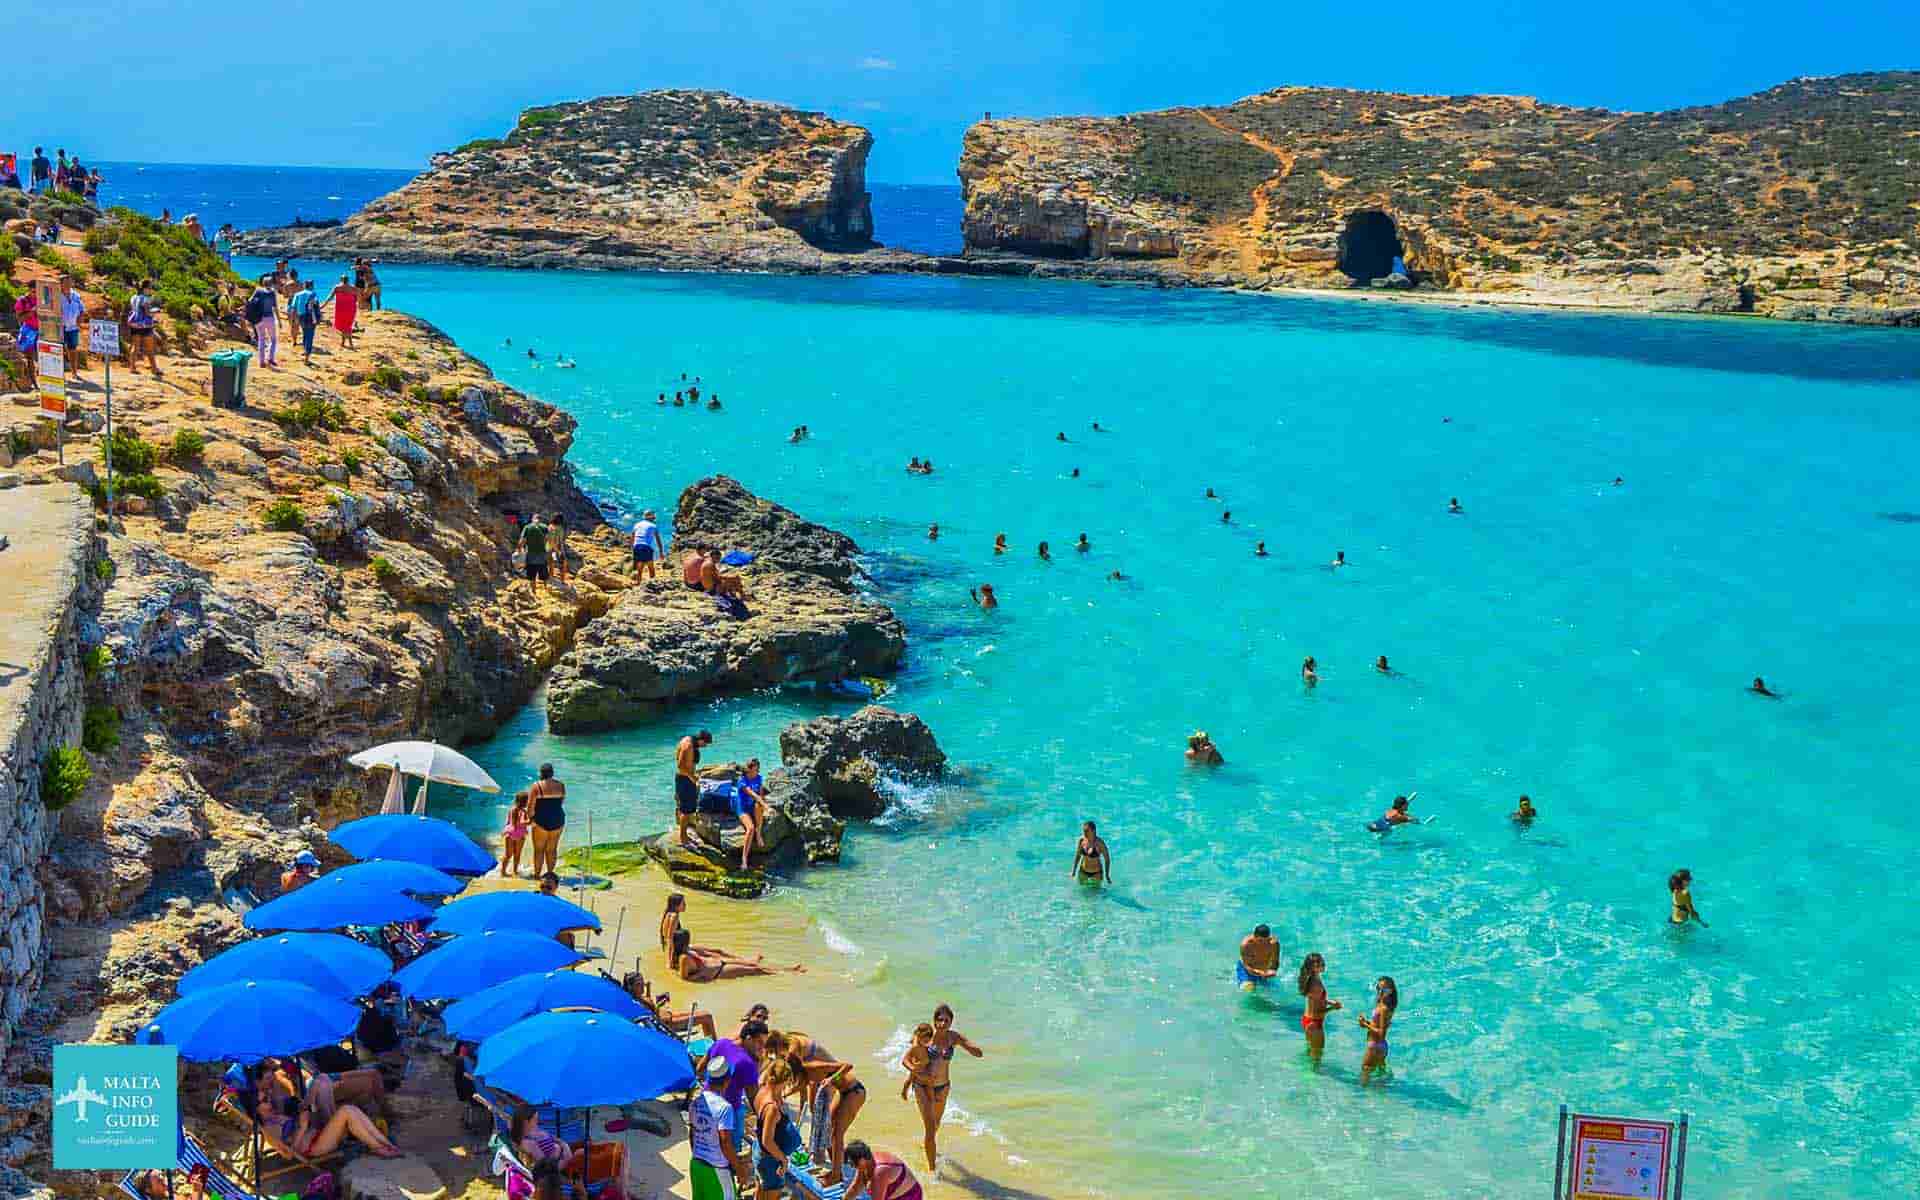 People swimming in the crystal sea at the Blue Lagoon Malta.